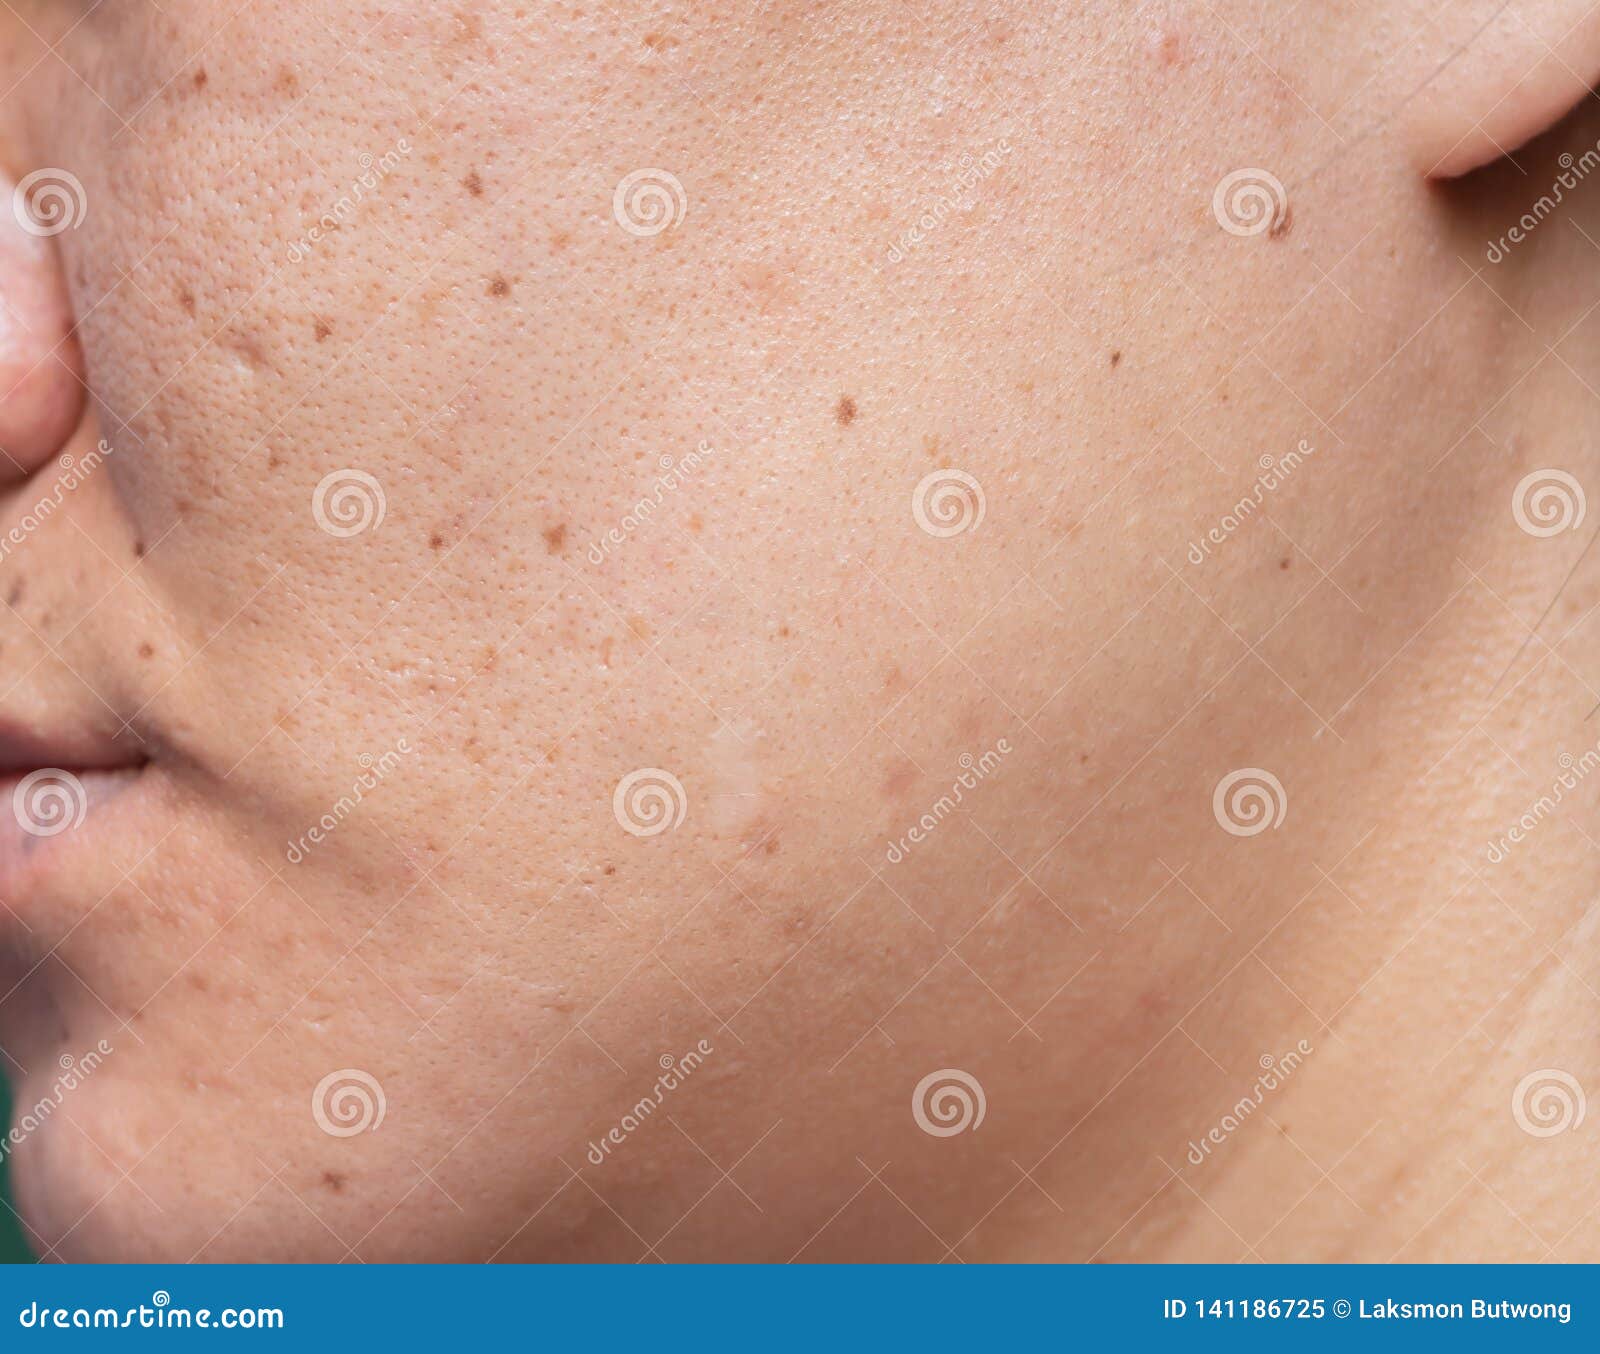 woman `s problematic skin , acne scars ,oily skin and pore, dark spots and blackhead and whitehead on the face